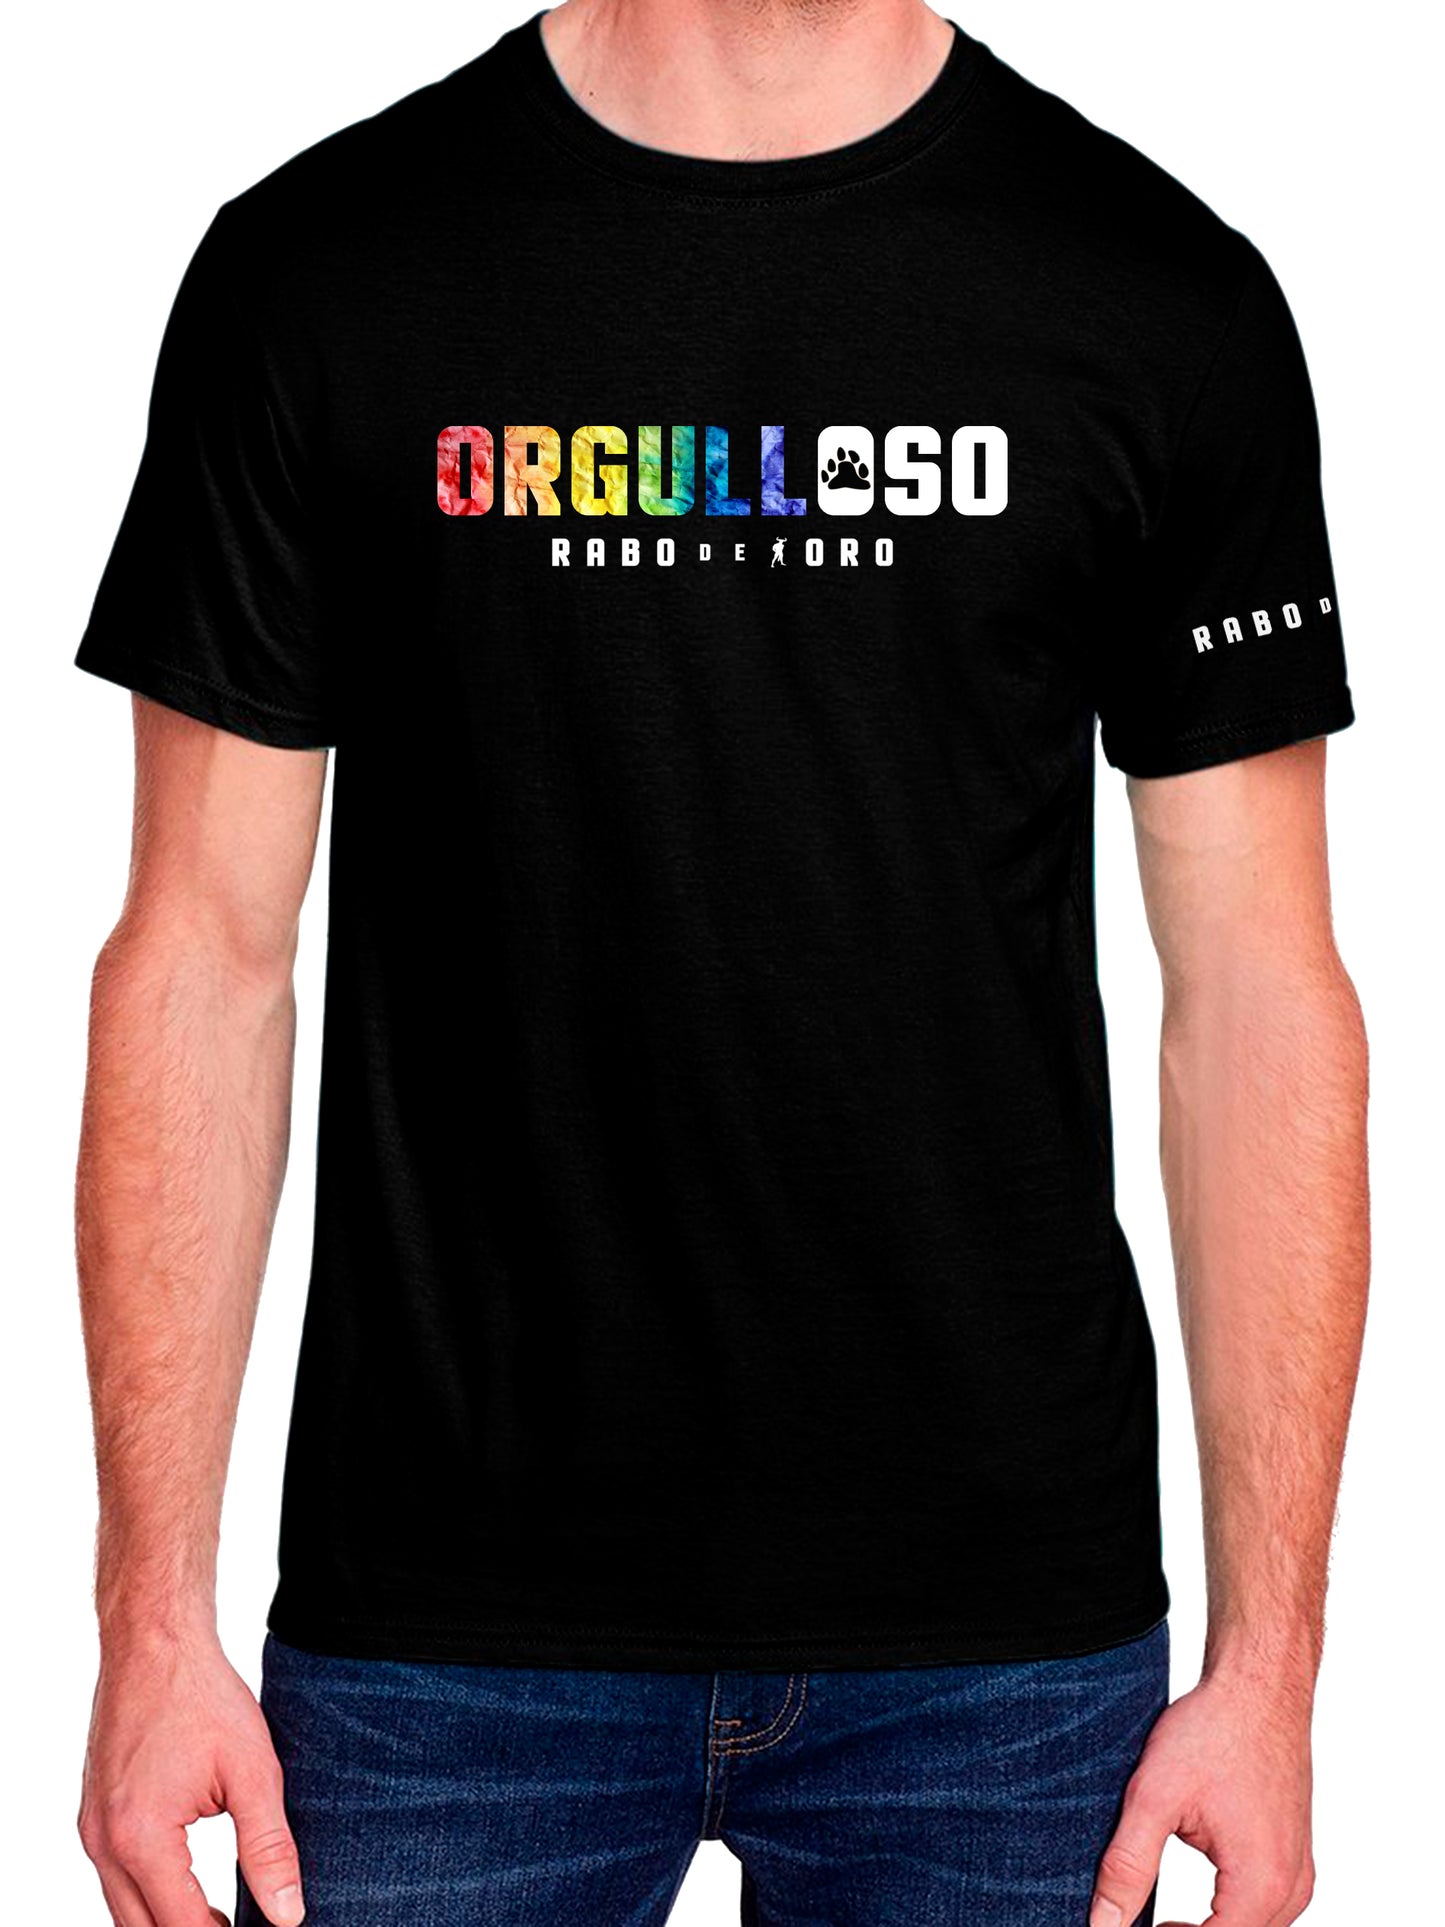 ORGULLOSO T-Shirt with Bear Paw details